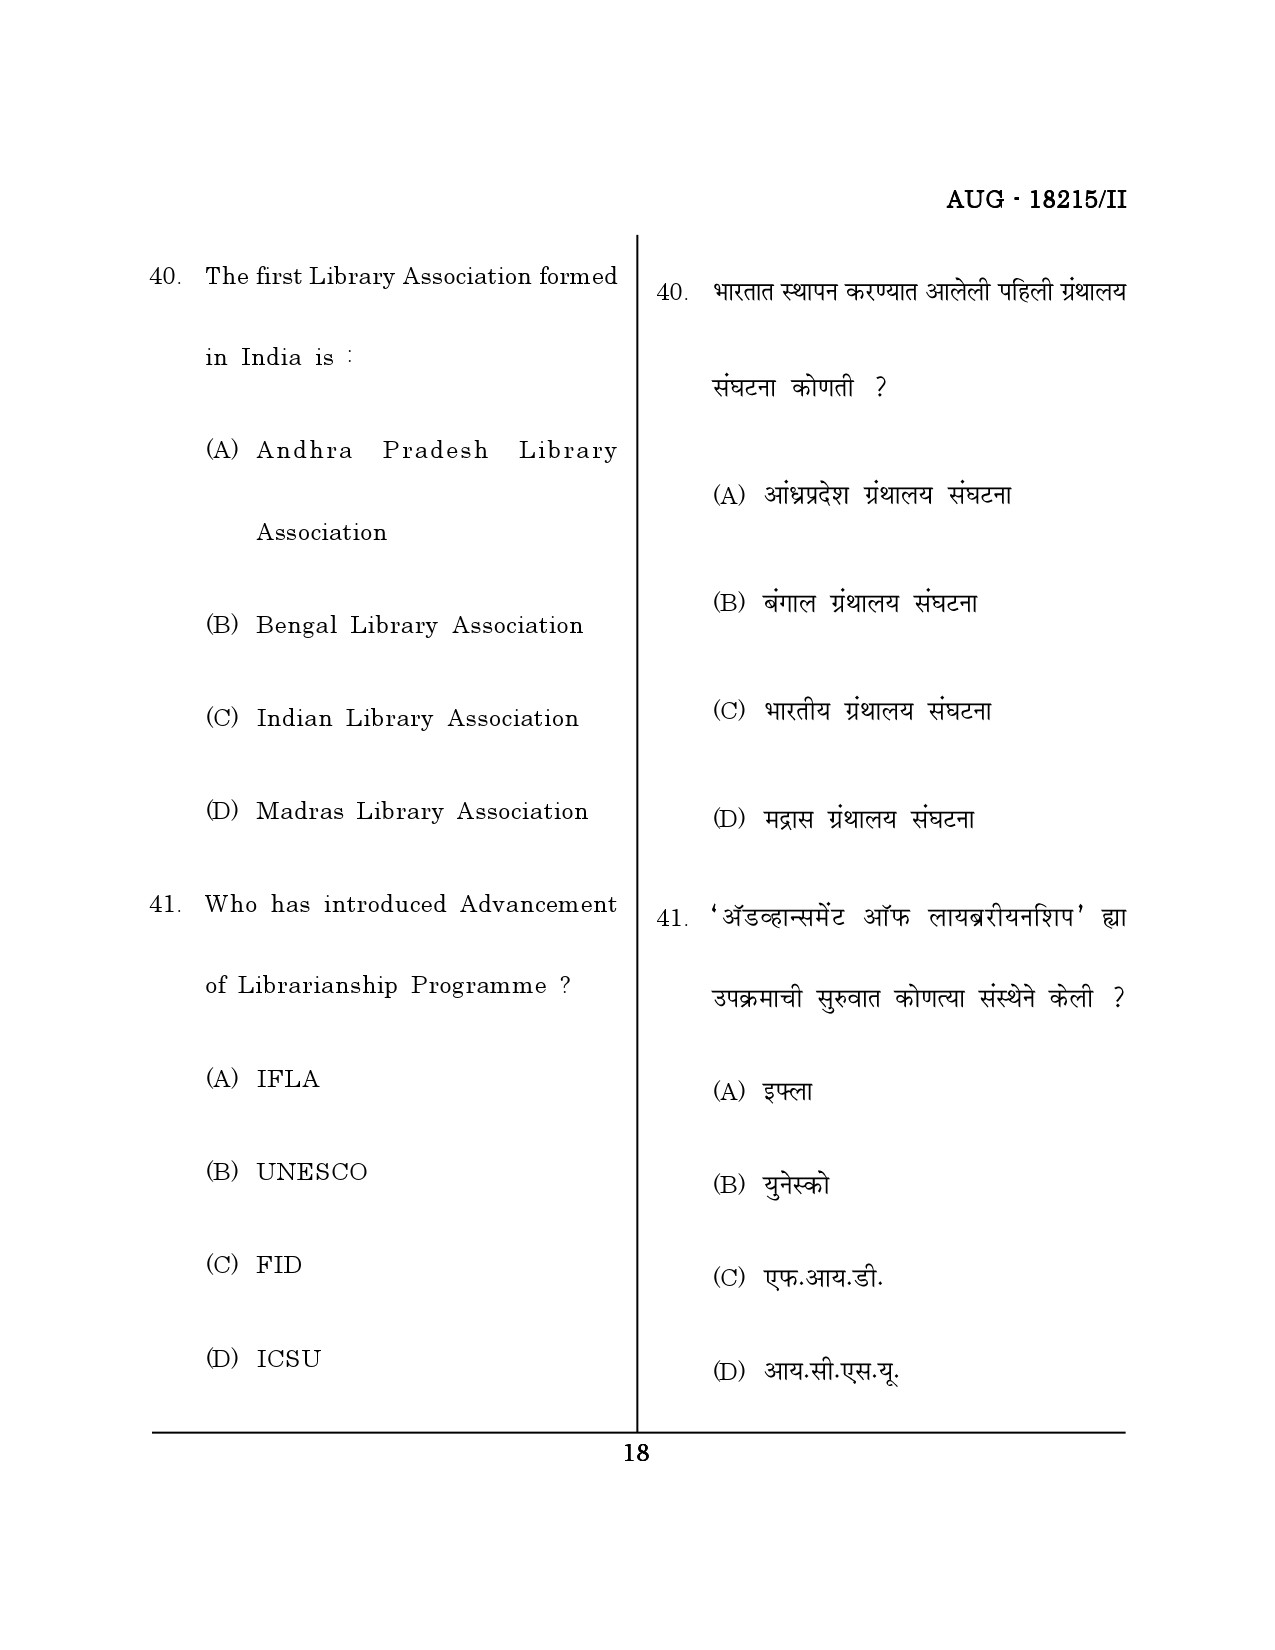 Maharashtra SET Library Information Science Question Paper II August 2015 17